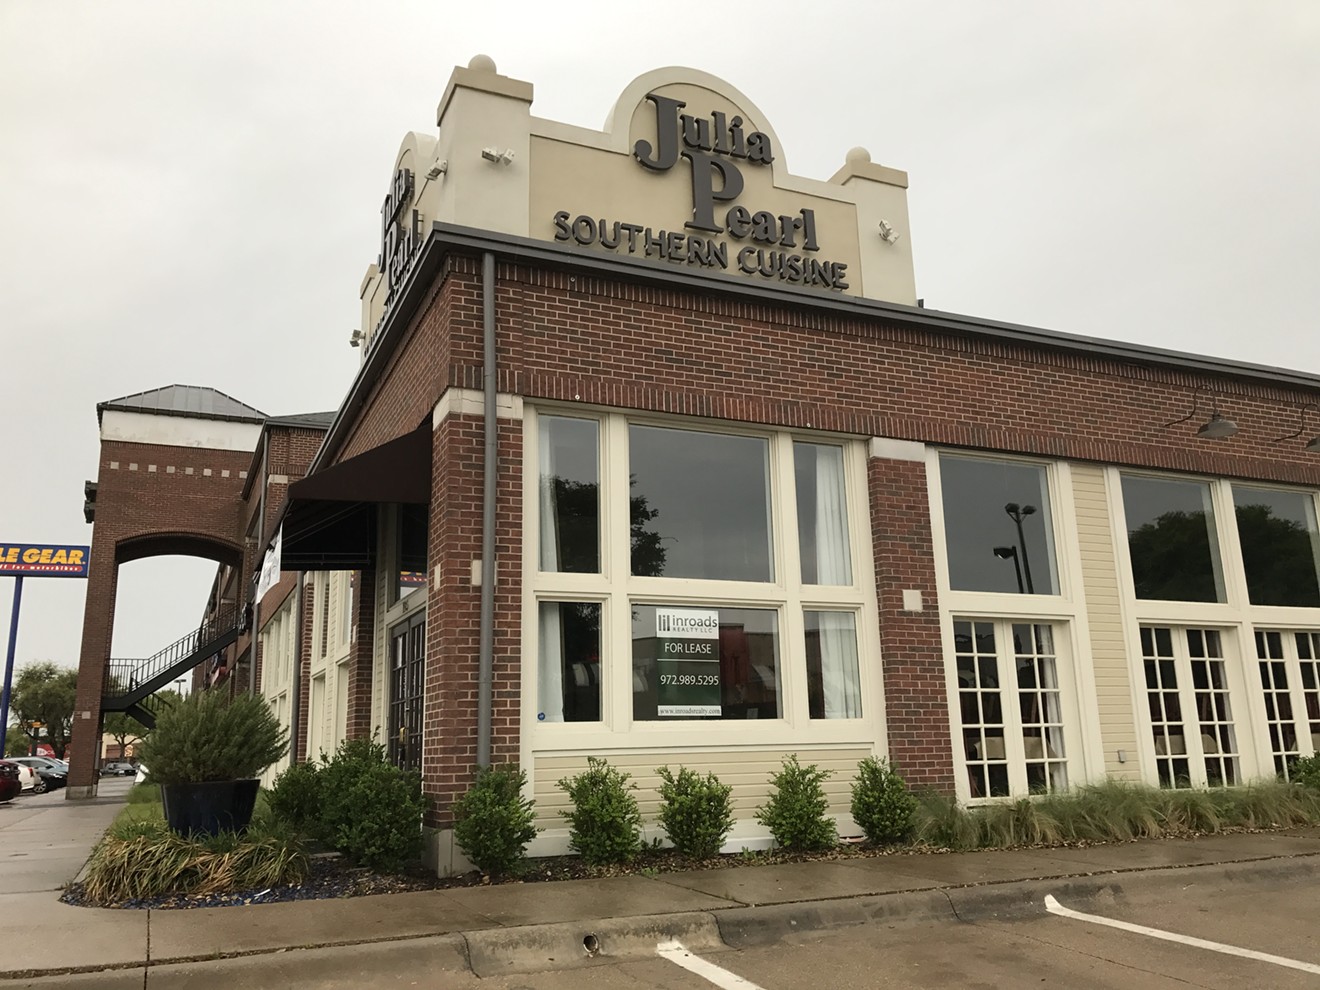 On Friday afternoon, when the restaurant was supposed to be open, Julia Pearl Southern Cuisine was empty save for the building's owners, who have filed an eviction lawsuit against Trendline Management.